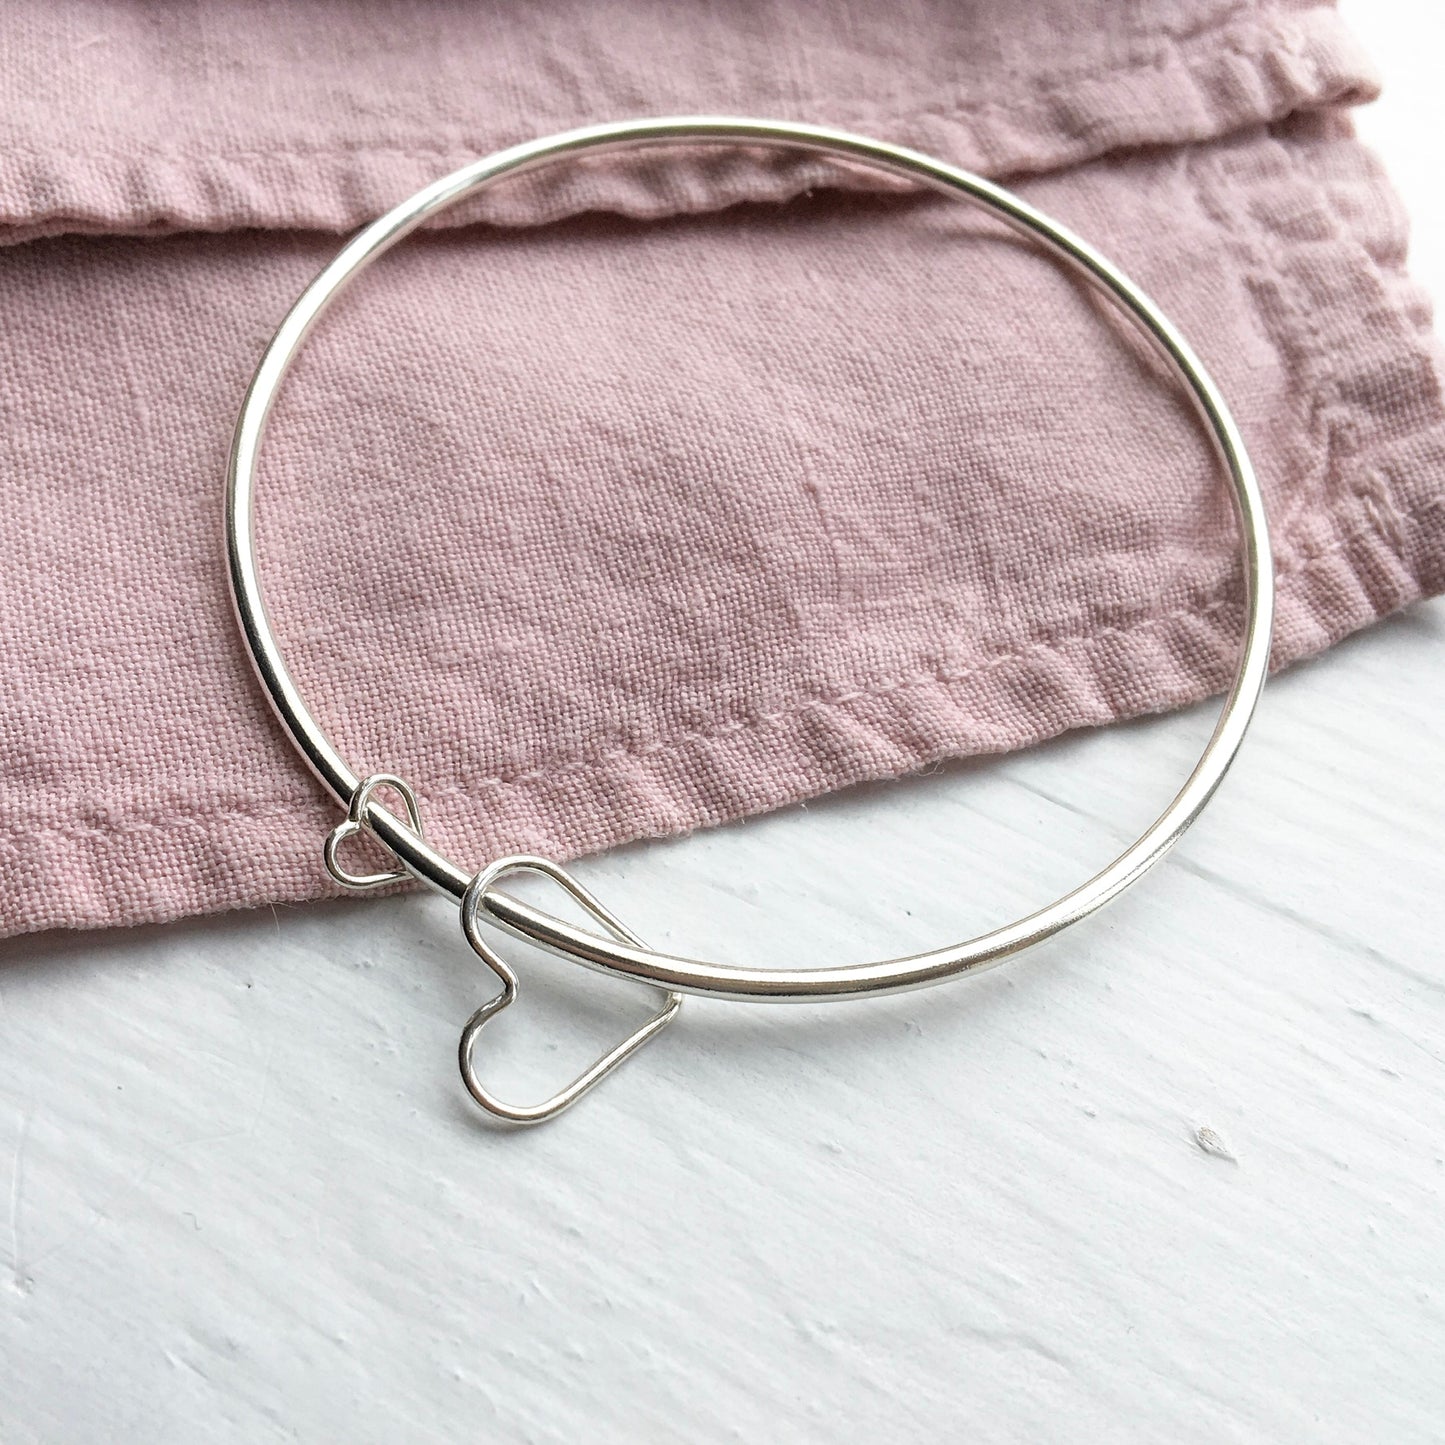 'You and Me' Heart Bangle - Sterling Silver Bracelet